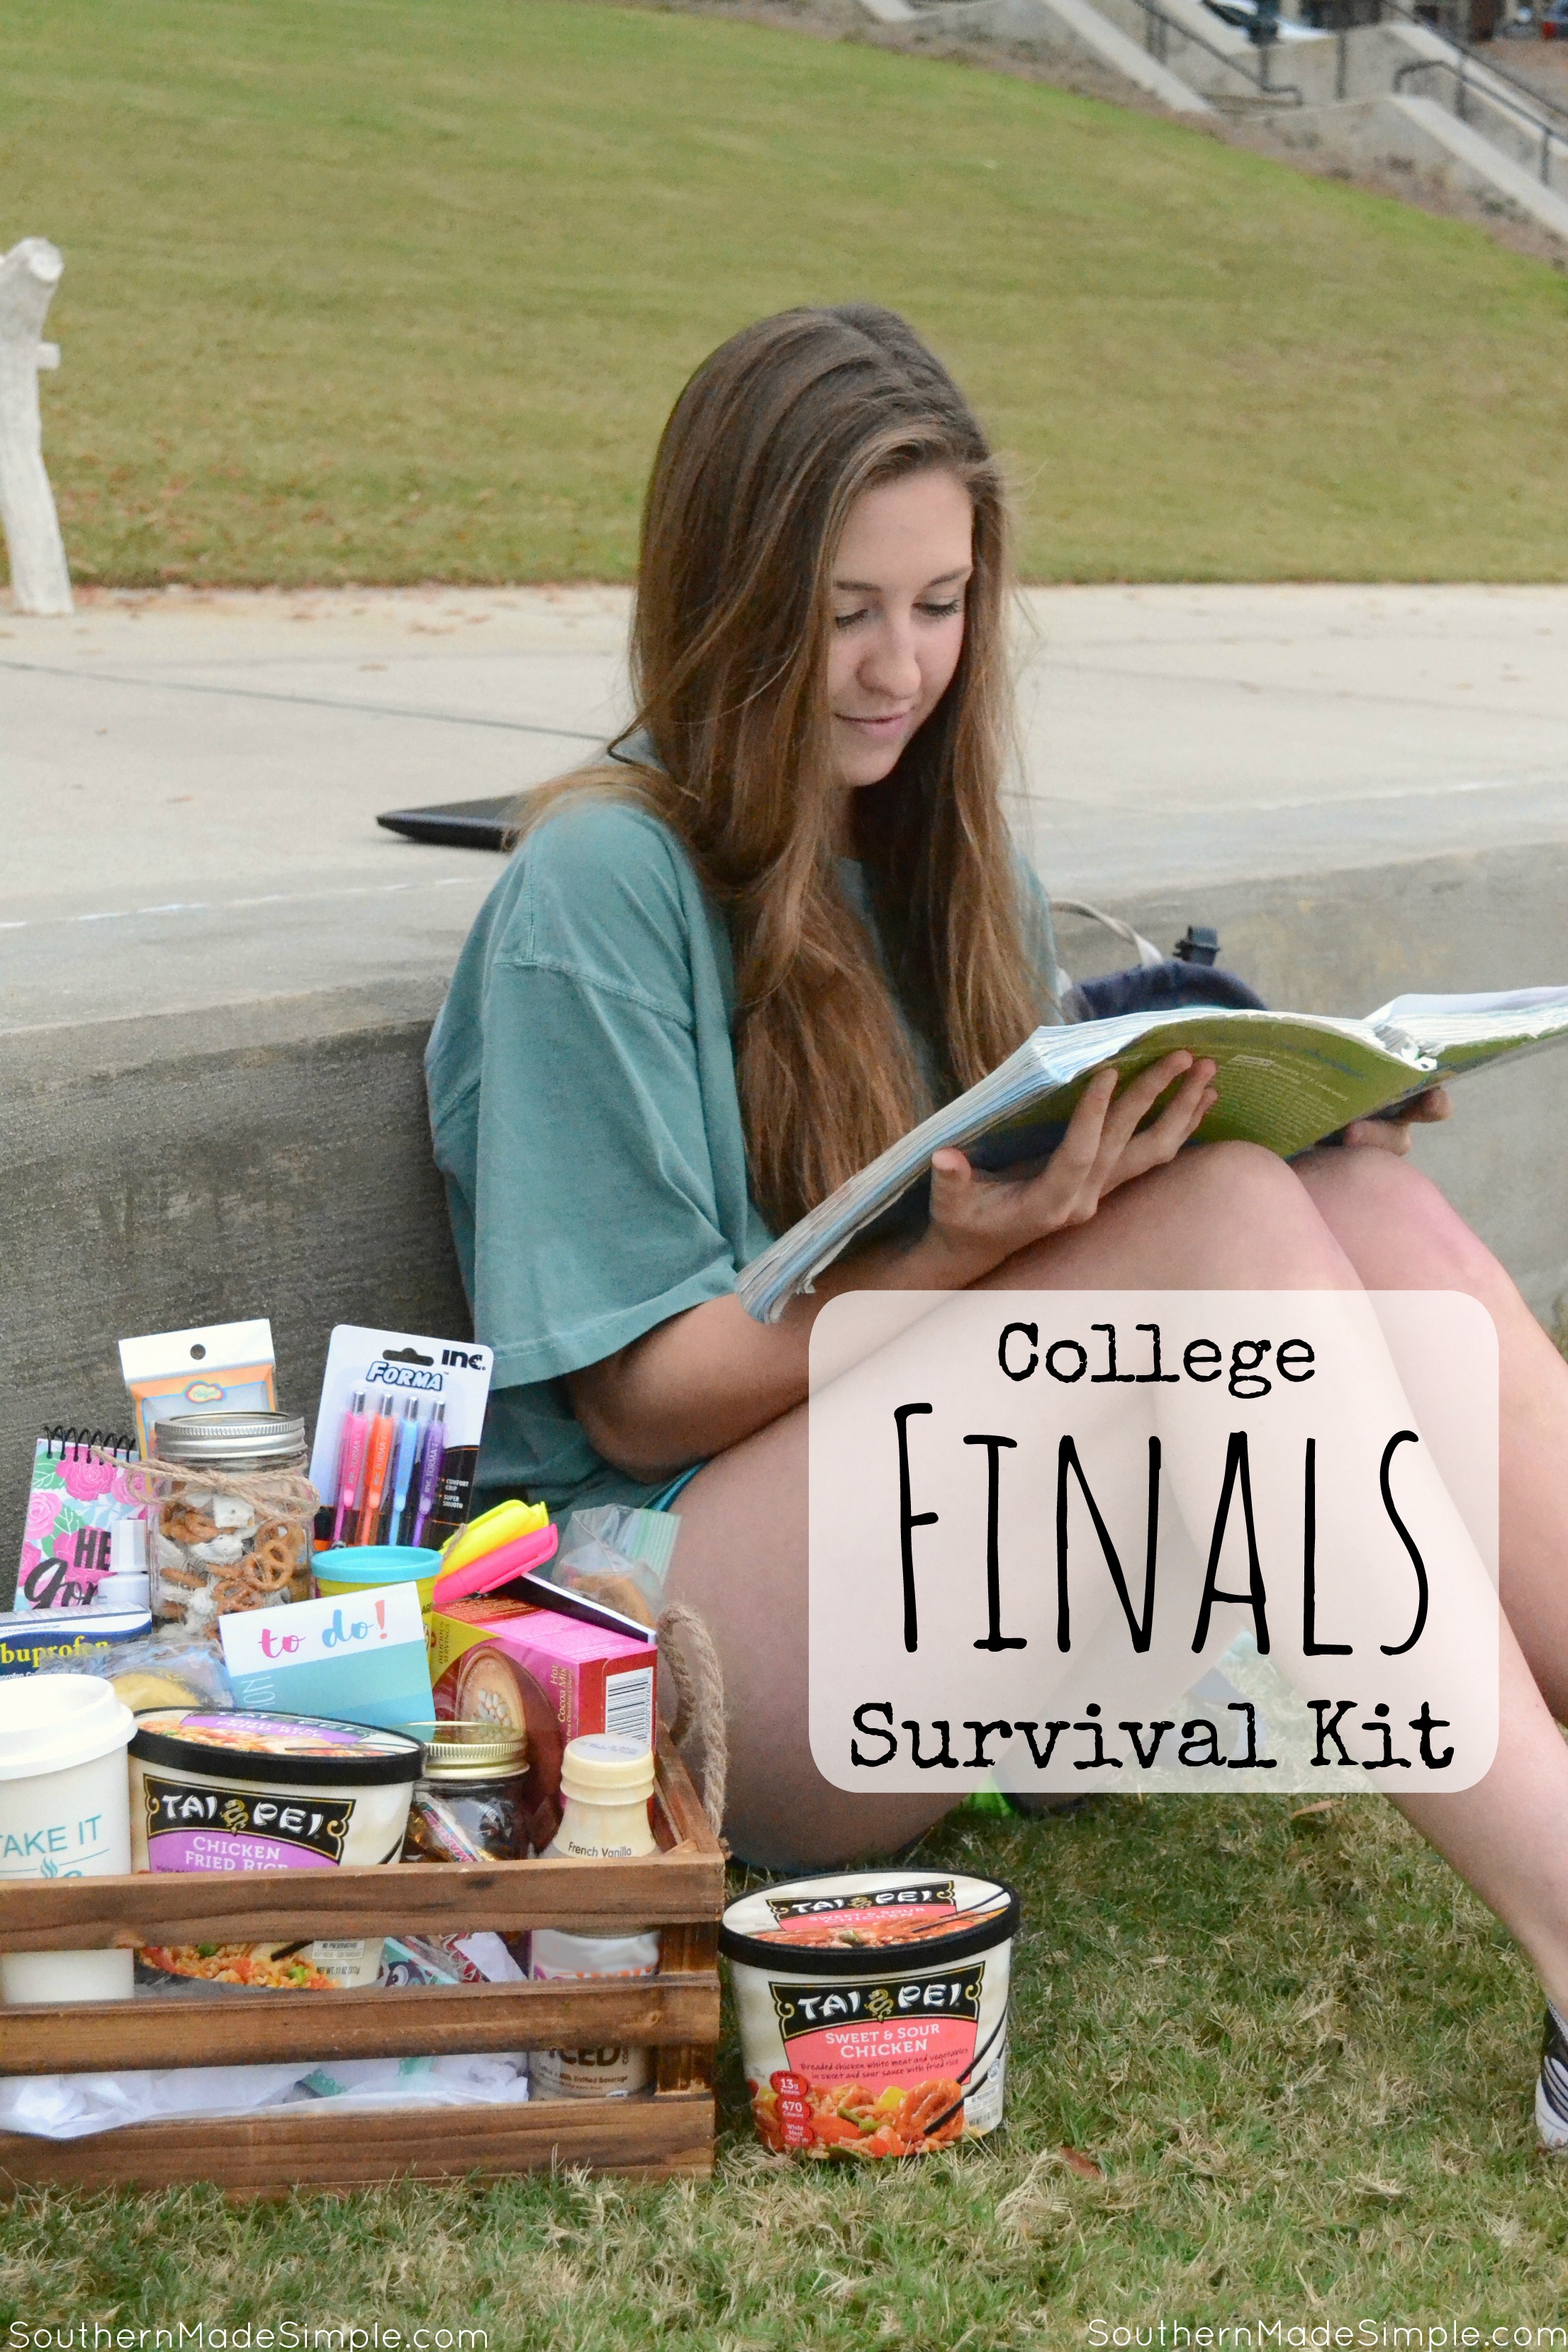 College Finals are a very stressful and busy time for young adults, and the pressure is on to perform their very best. Take some of the burden off of their shoulders by making a College Finals Survival kit filled with good eats and treats to help them get through it! #TaiPeiFrozenFood #IC #ad #friedrice